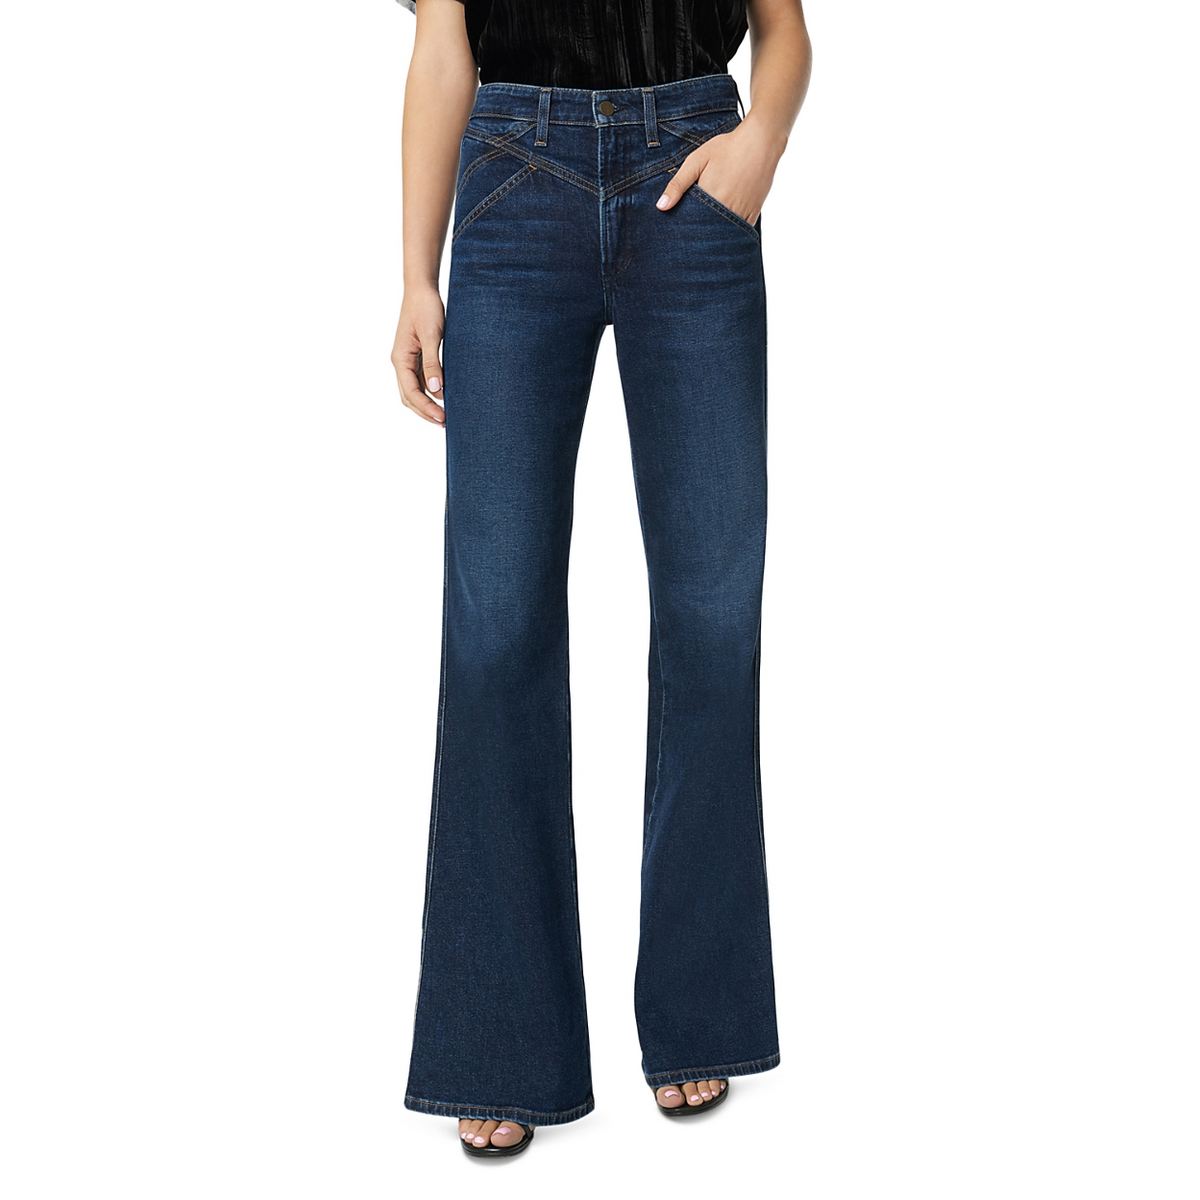 JOES JEANS NEW Women's The Molly High Waist Flare Jeans TEDO 